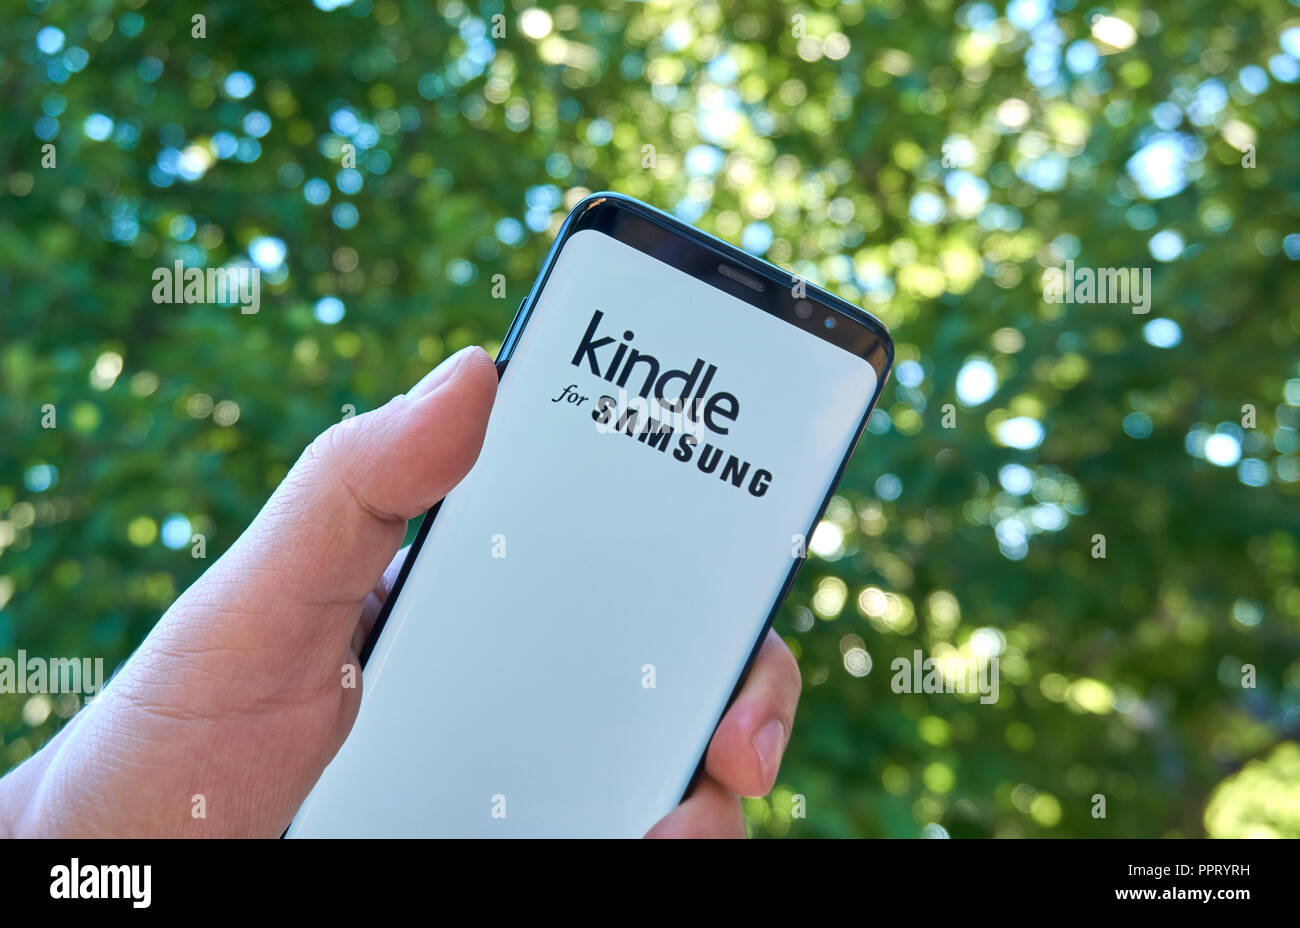 MONTREAL, CANADA - August 28, 2018: Amazon Kindle for Samsung android app on Samsung s8 screen in a hand. Stock Photo